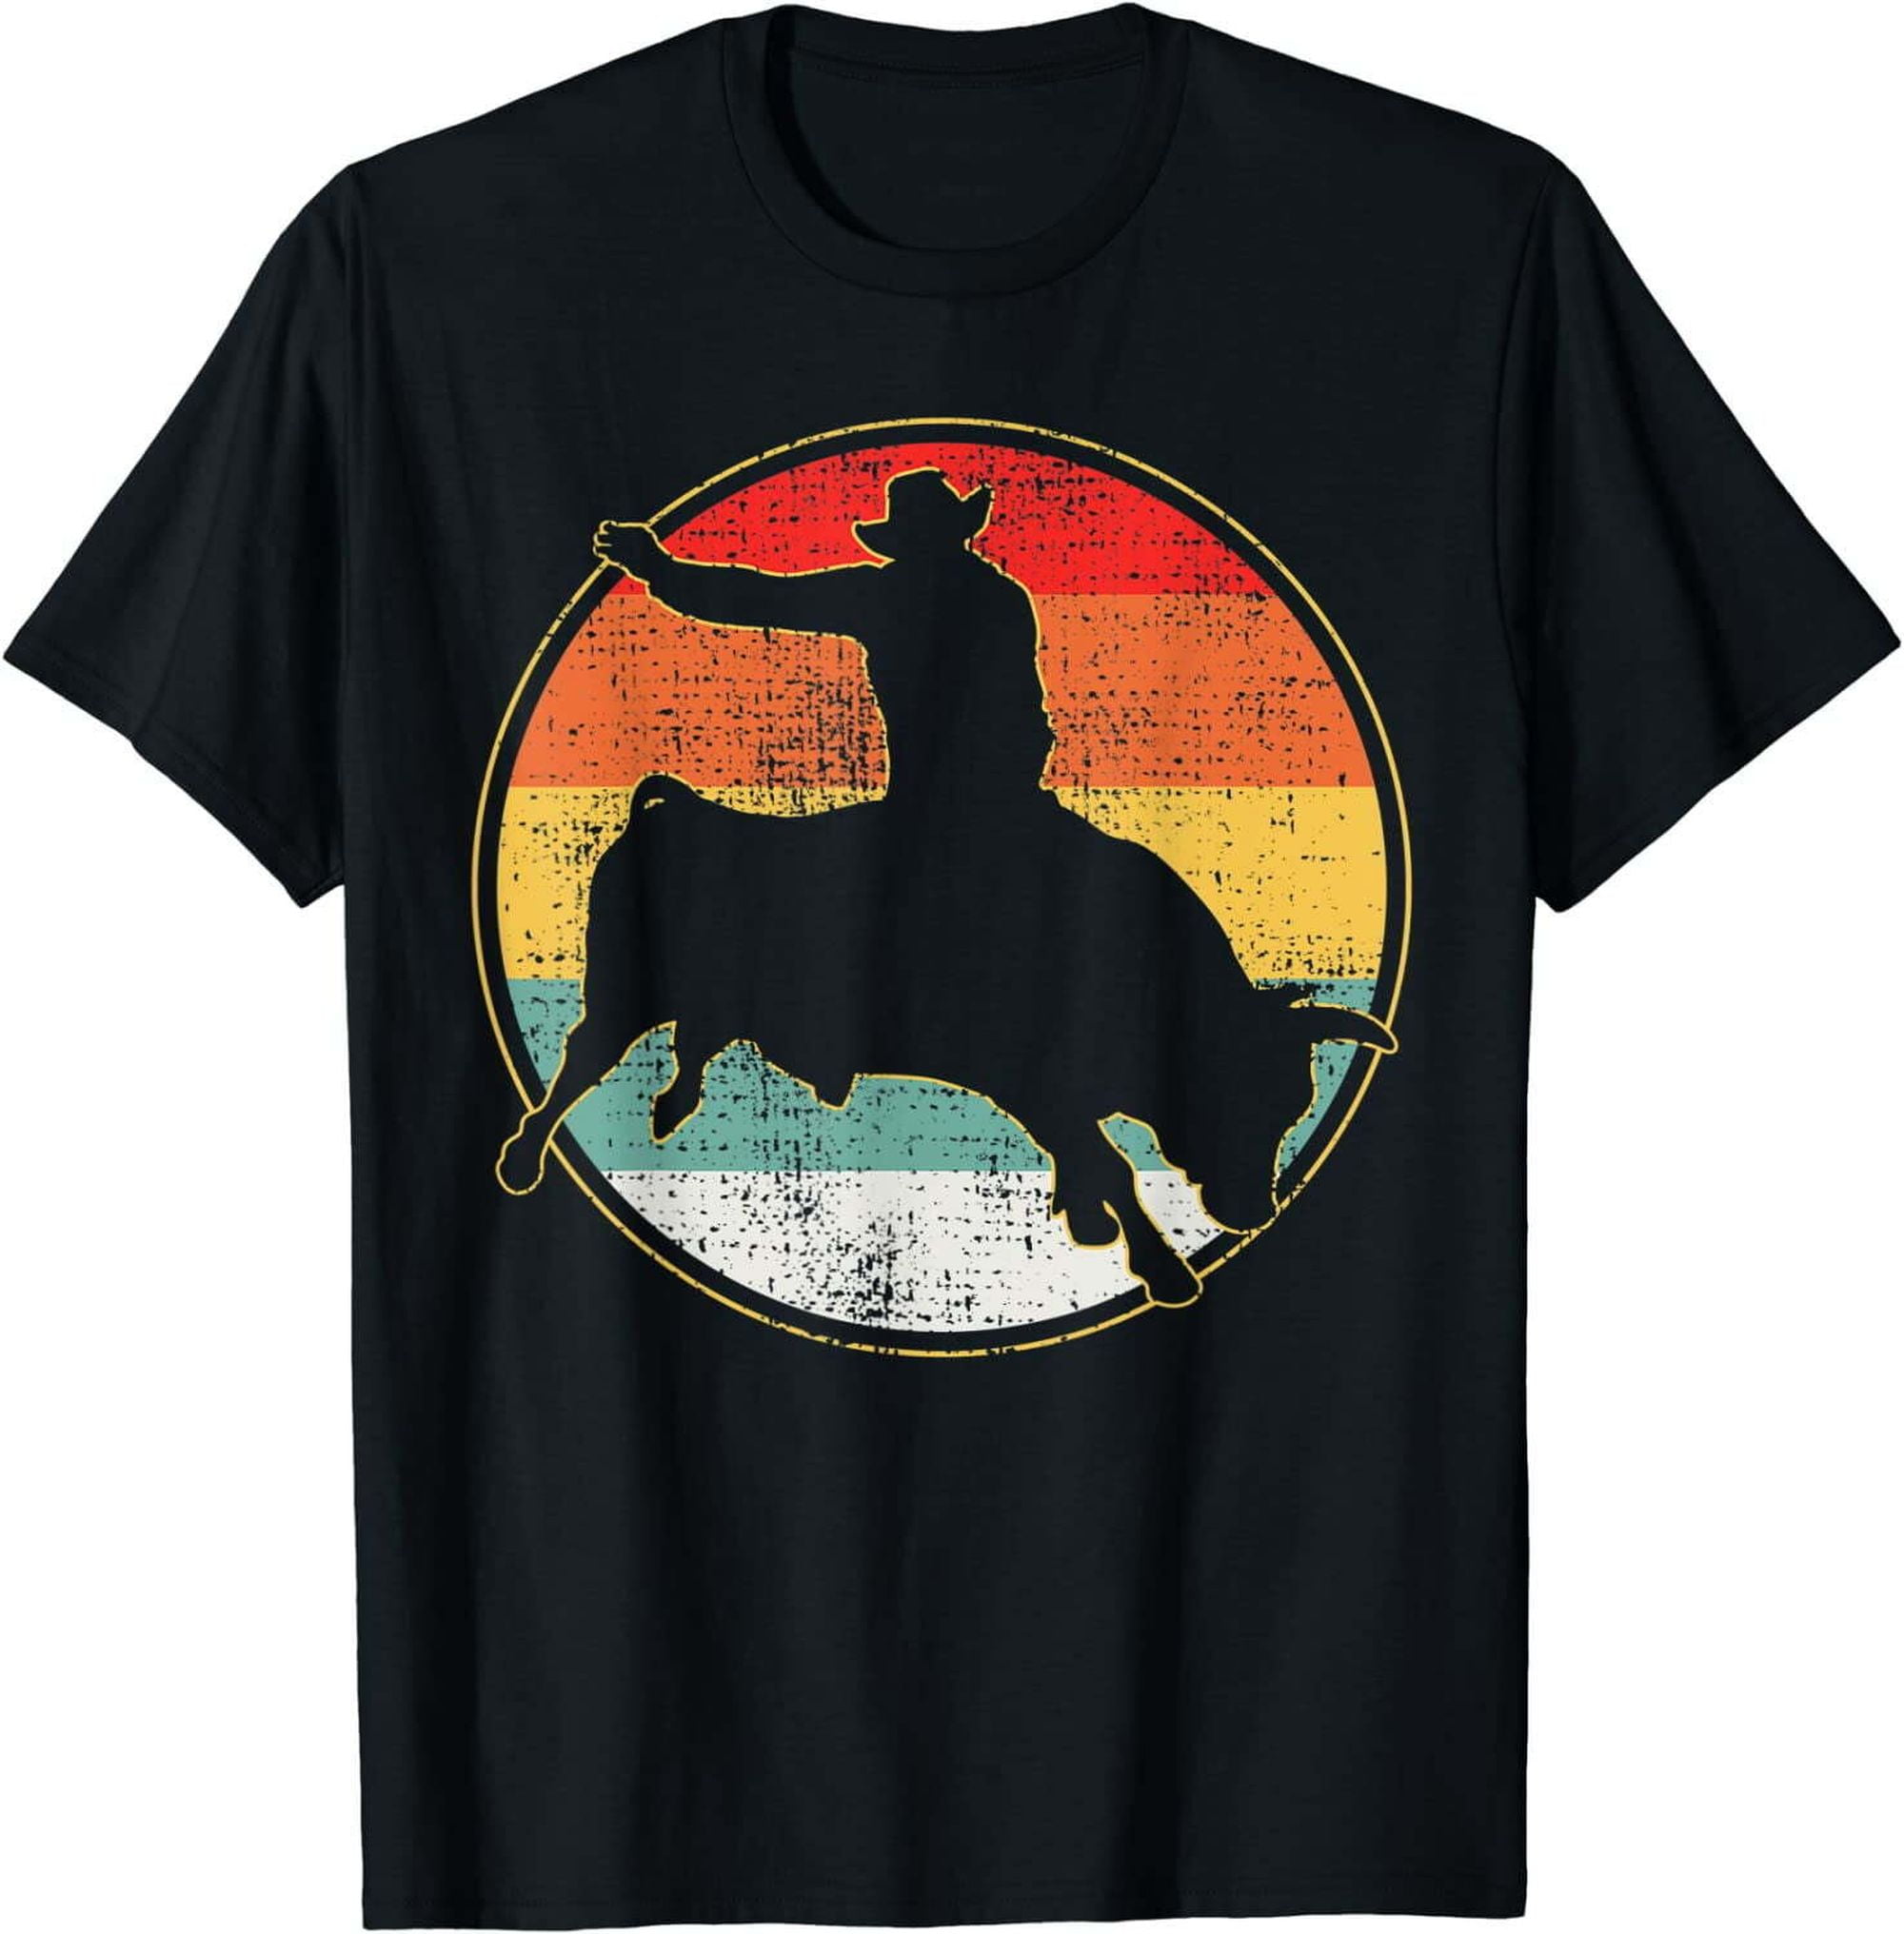 Vintage Rodeo Cowboy Shirt: Timeless Western Style for the Fearless and ...